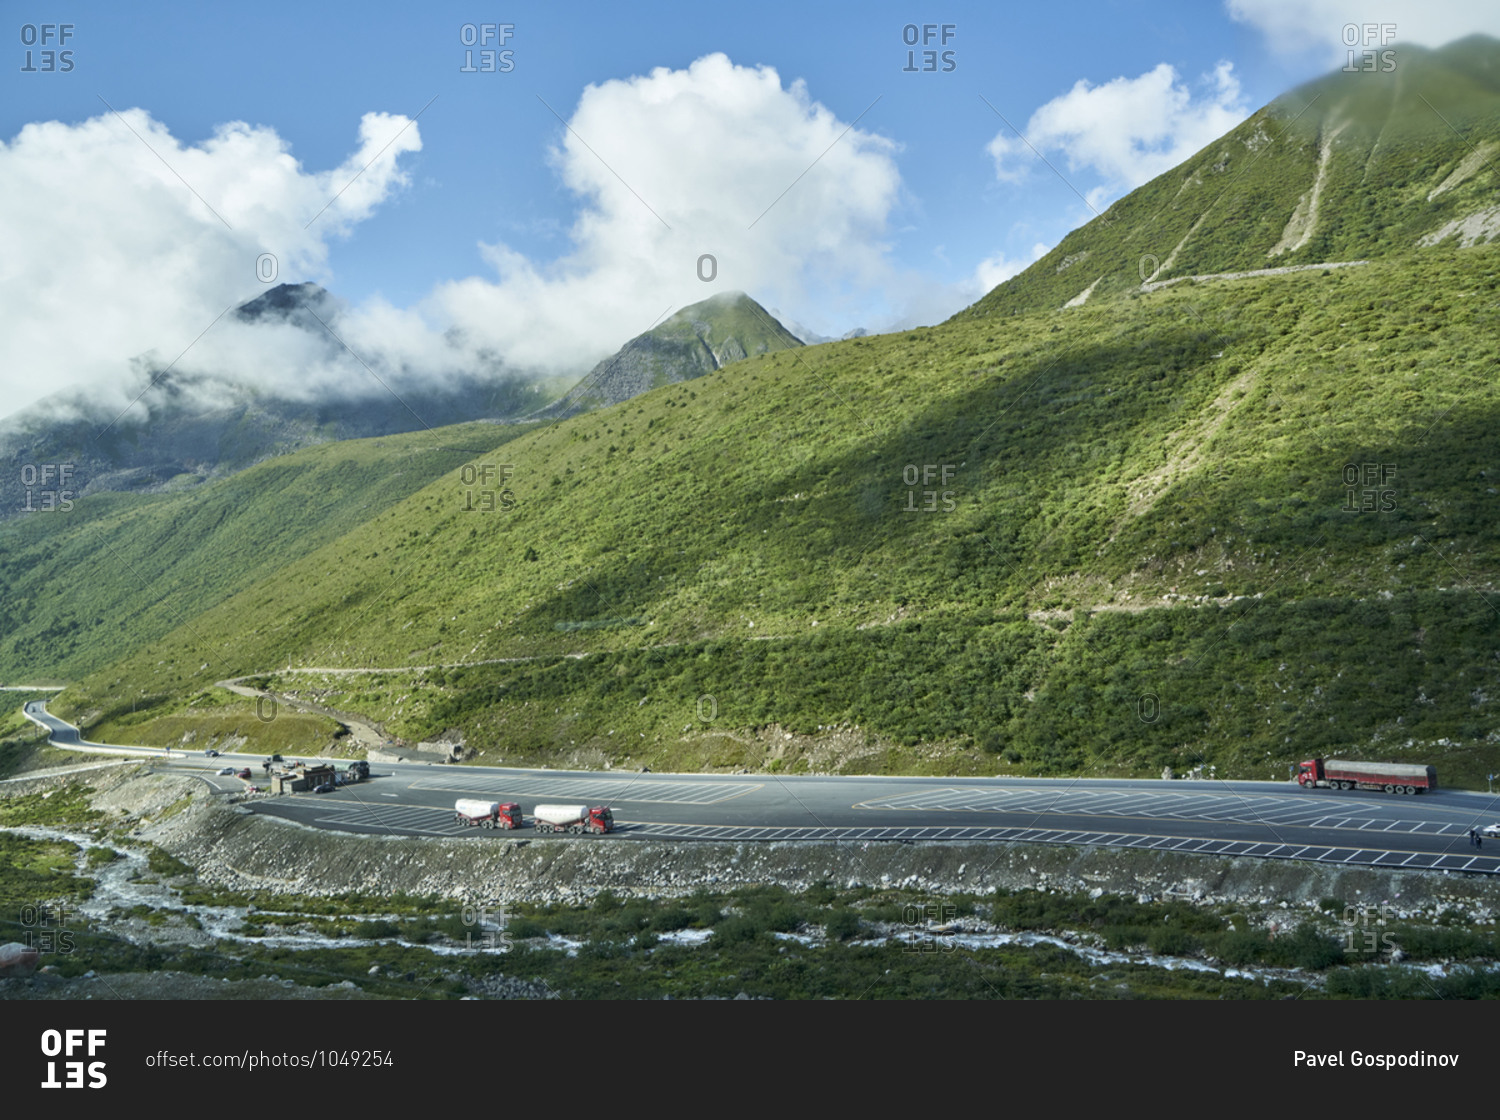 Chengdu-Lhasa Highway, Sichuan, China; August 10, 2019; The Chengdu-Lhasa Highway, also called Sichuan-Tibet Highway for short, is a modern upgrade of the ancient Sichuan-Tibet Highway. It starts from Chengdu, the capital of Sichuan Province in the east, 